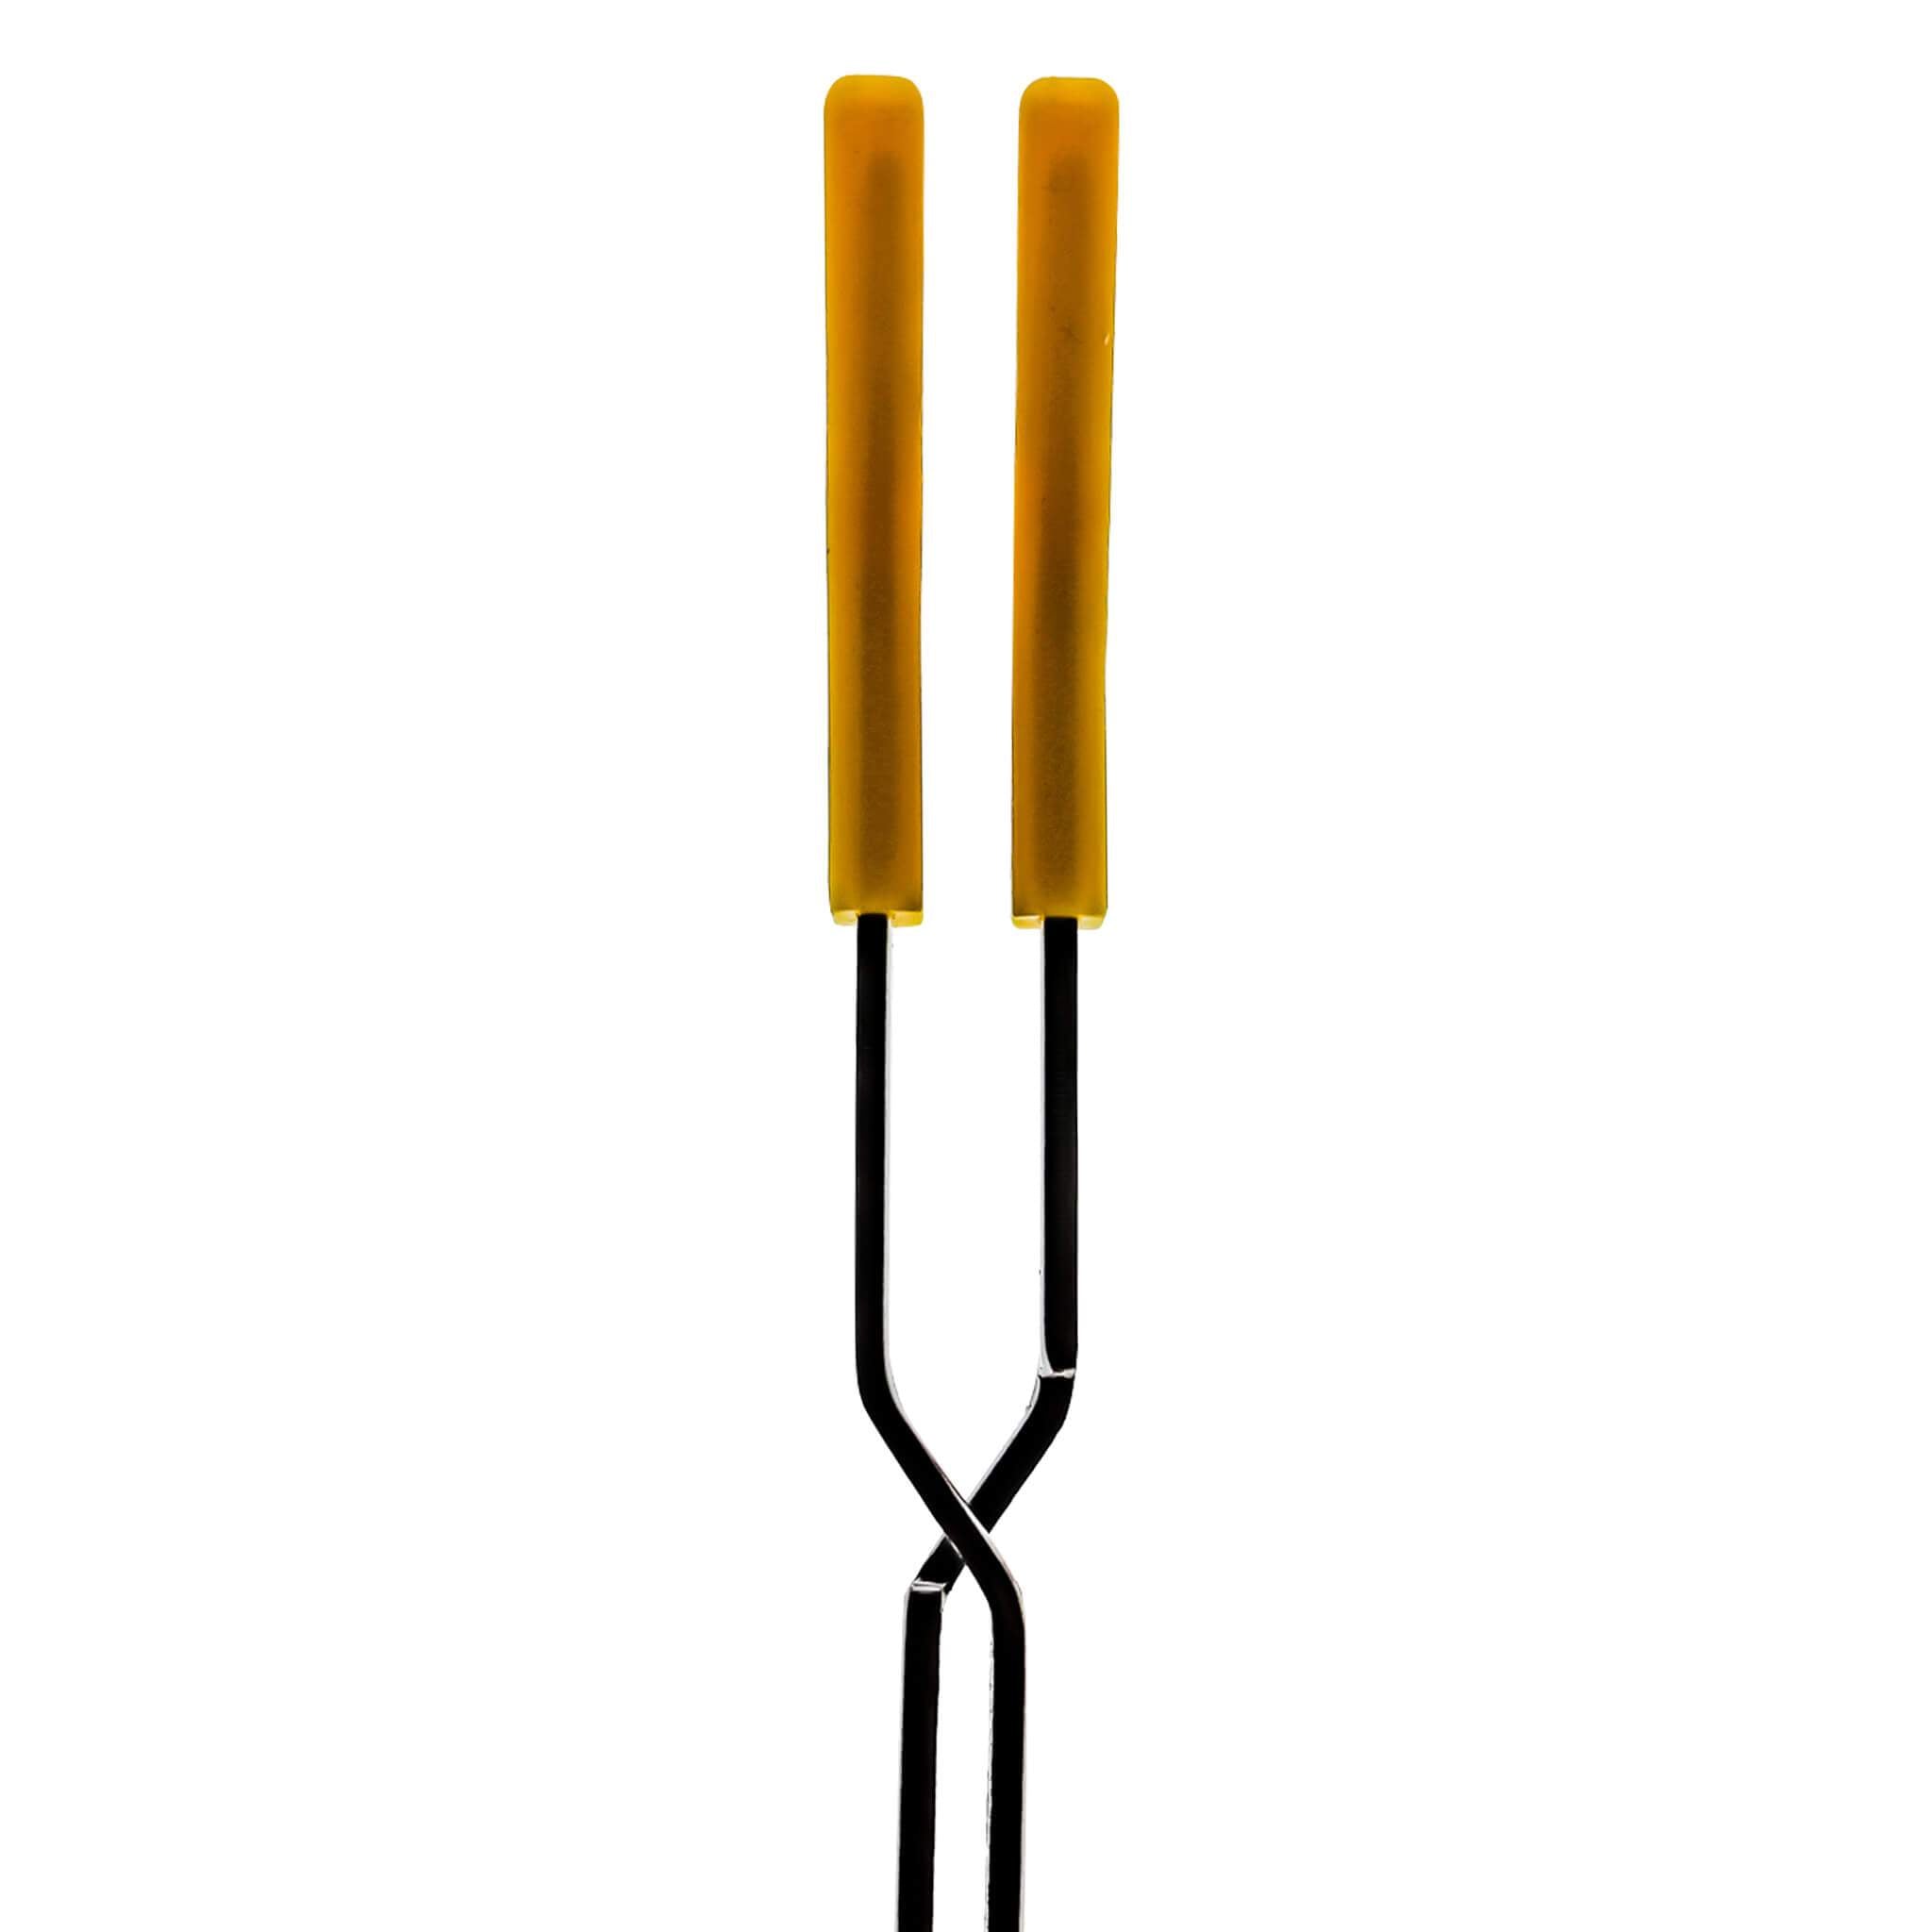 Reverse Tweezers, Silicone Tipped